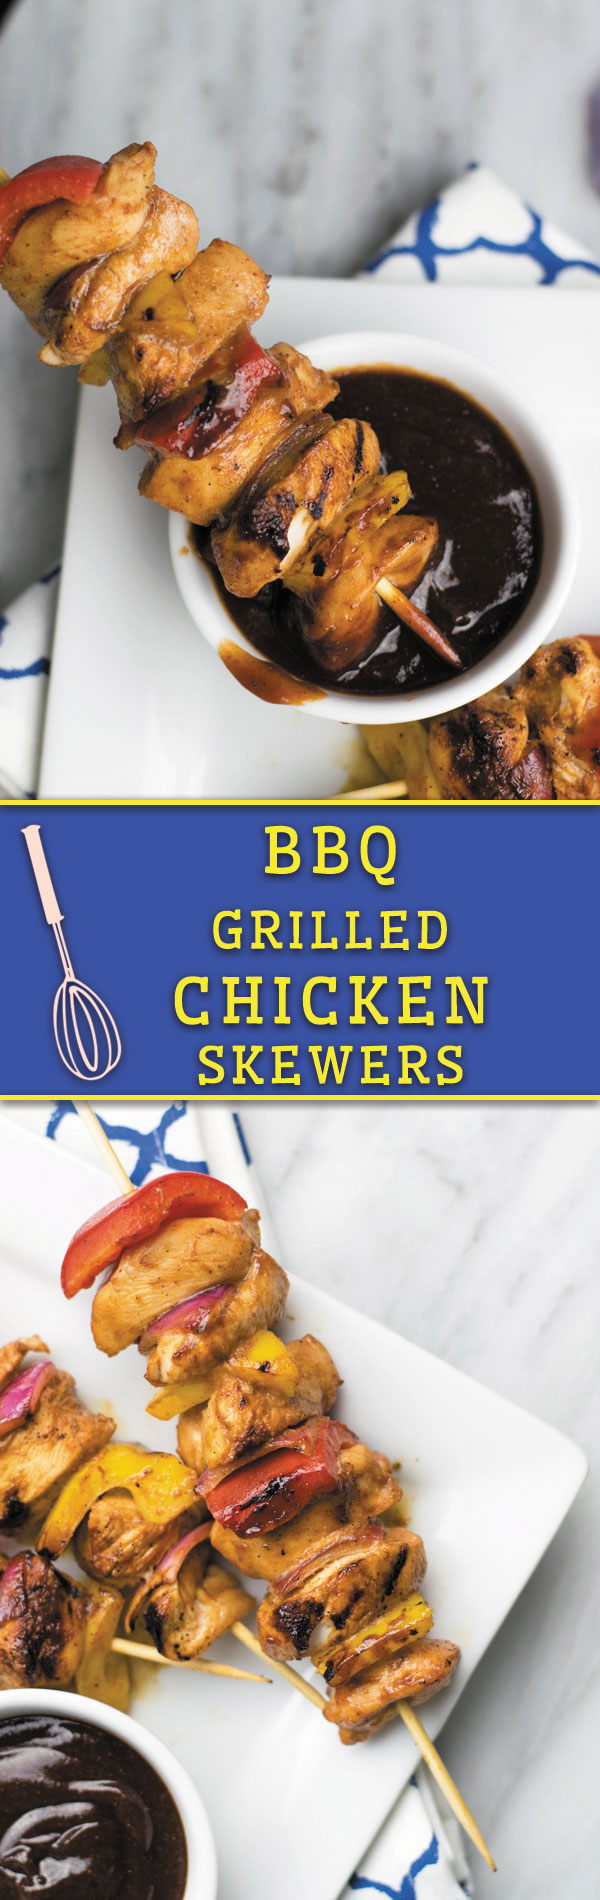 These Grilled BBQ CHICKEN SKEWERS are moist, perfectly seasoned and so good for summer grilling! OR make in oven and serve with a light salad!